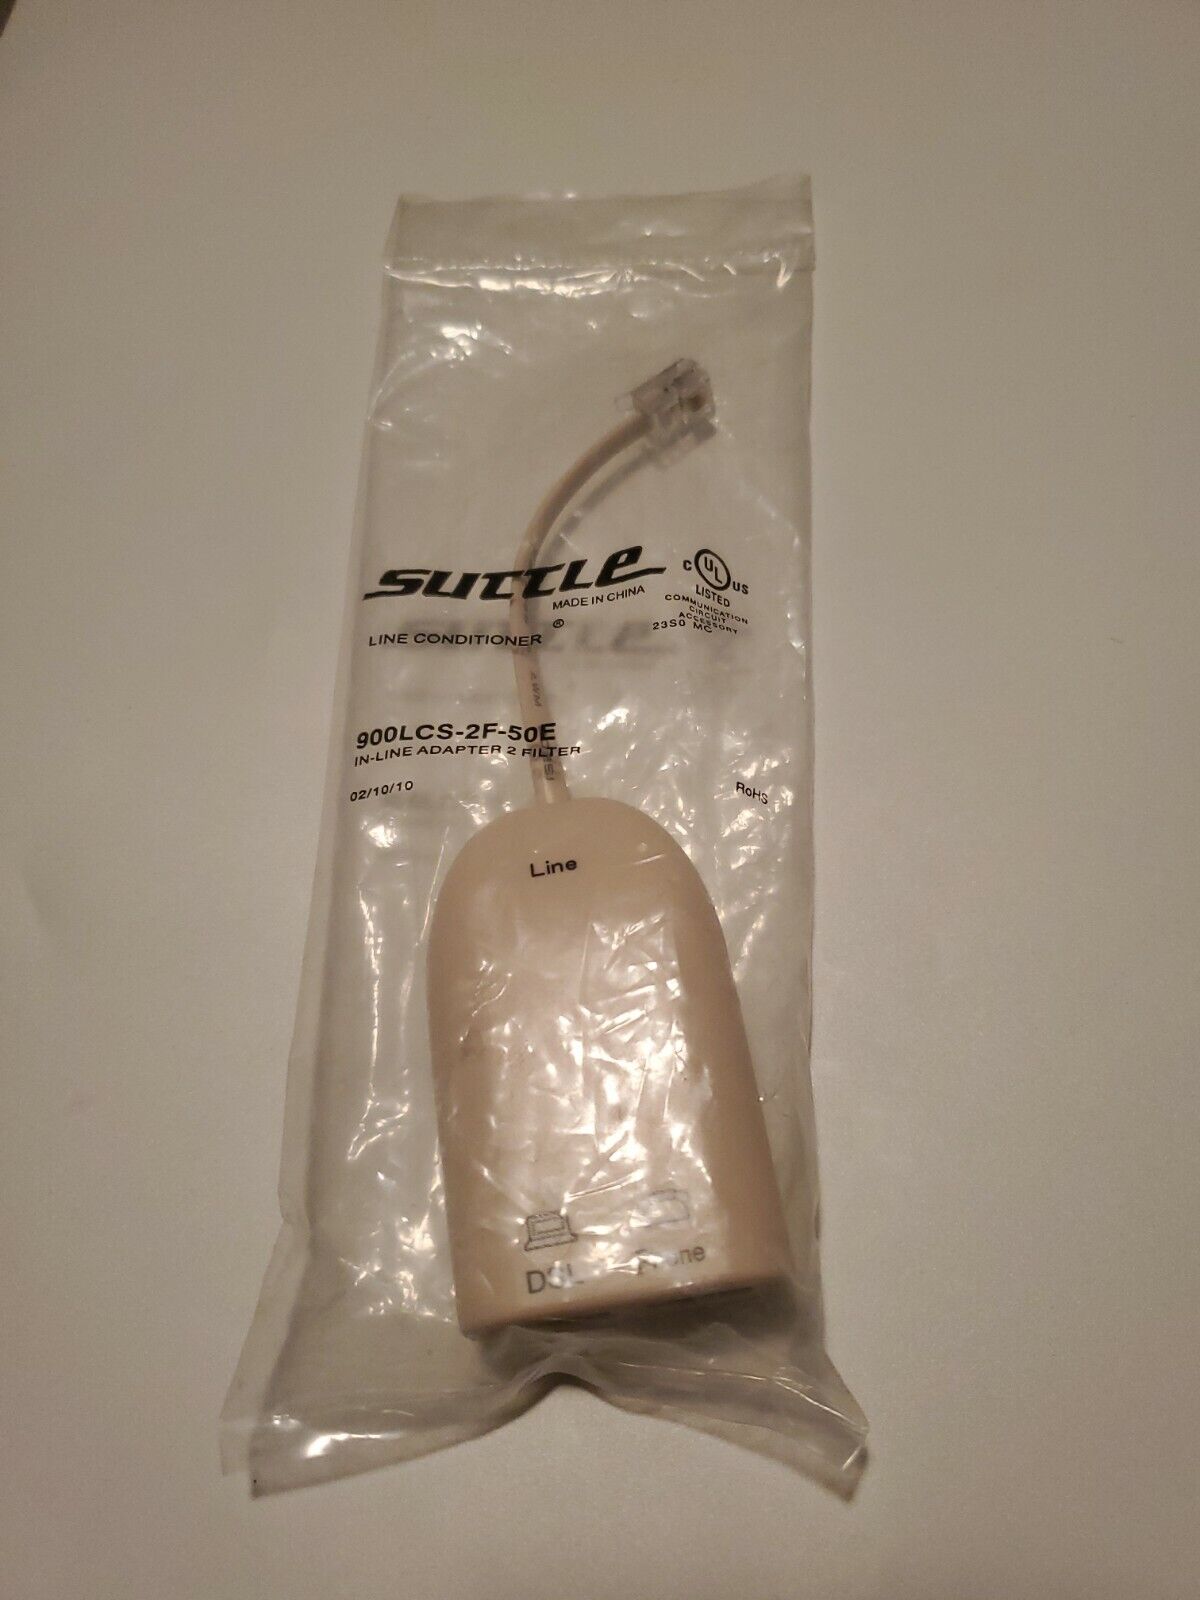 Suttle Line Condtioner 900LCS-2F-50E In-Line Adapter 2 Filter Brand New